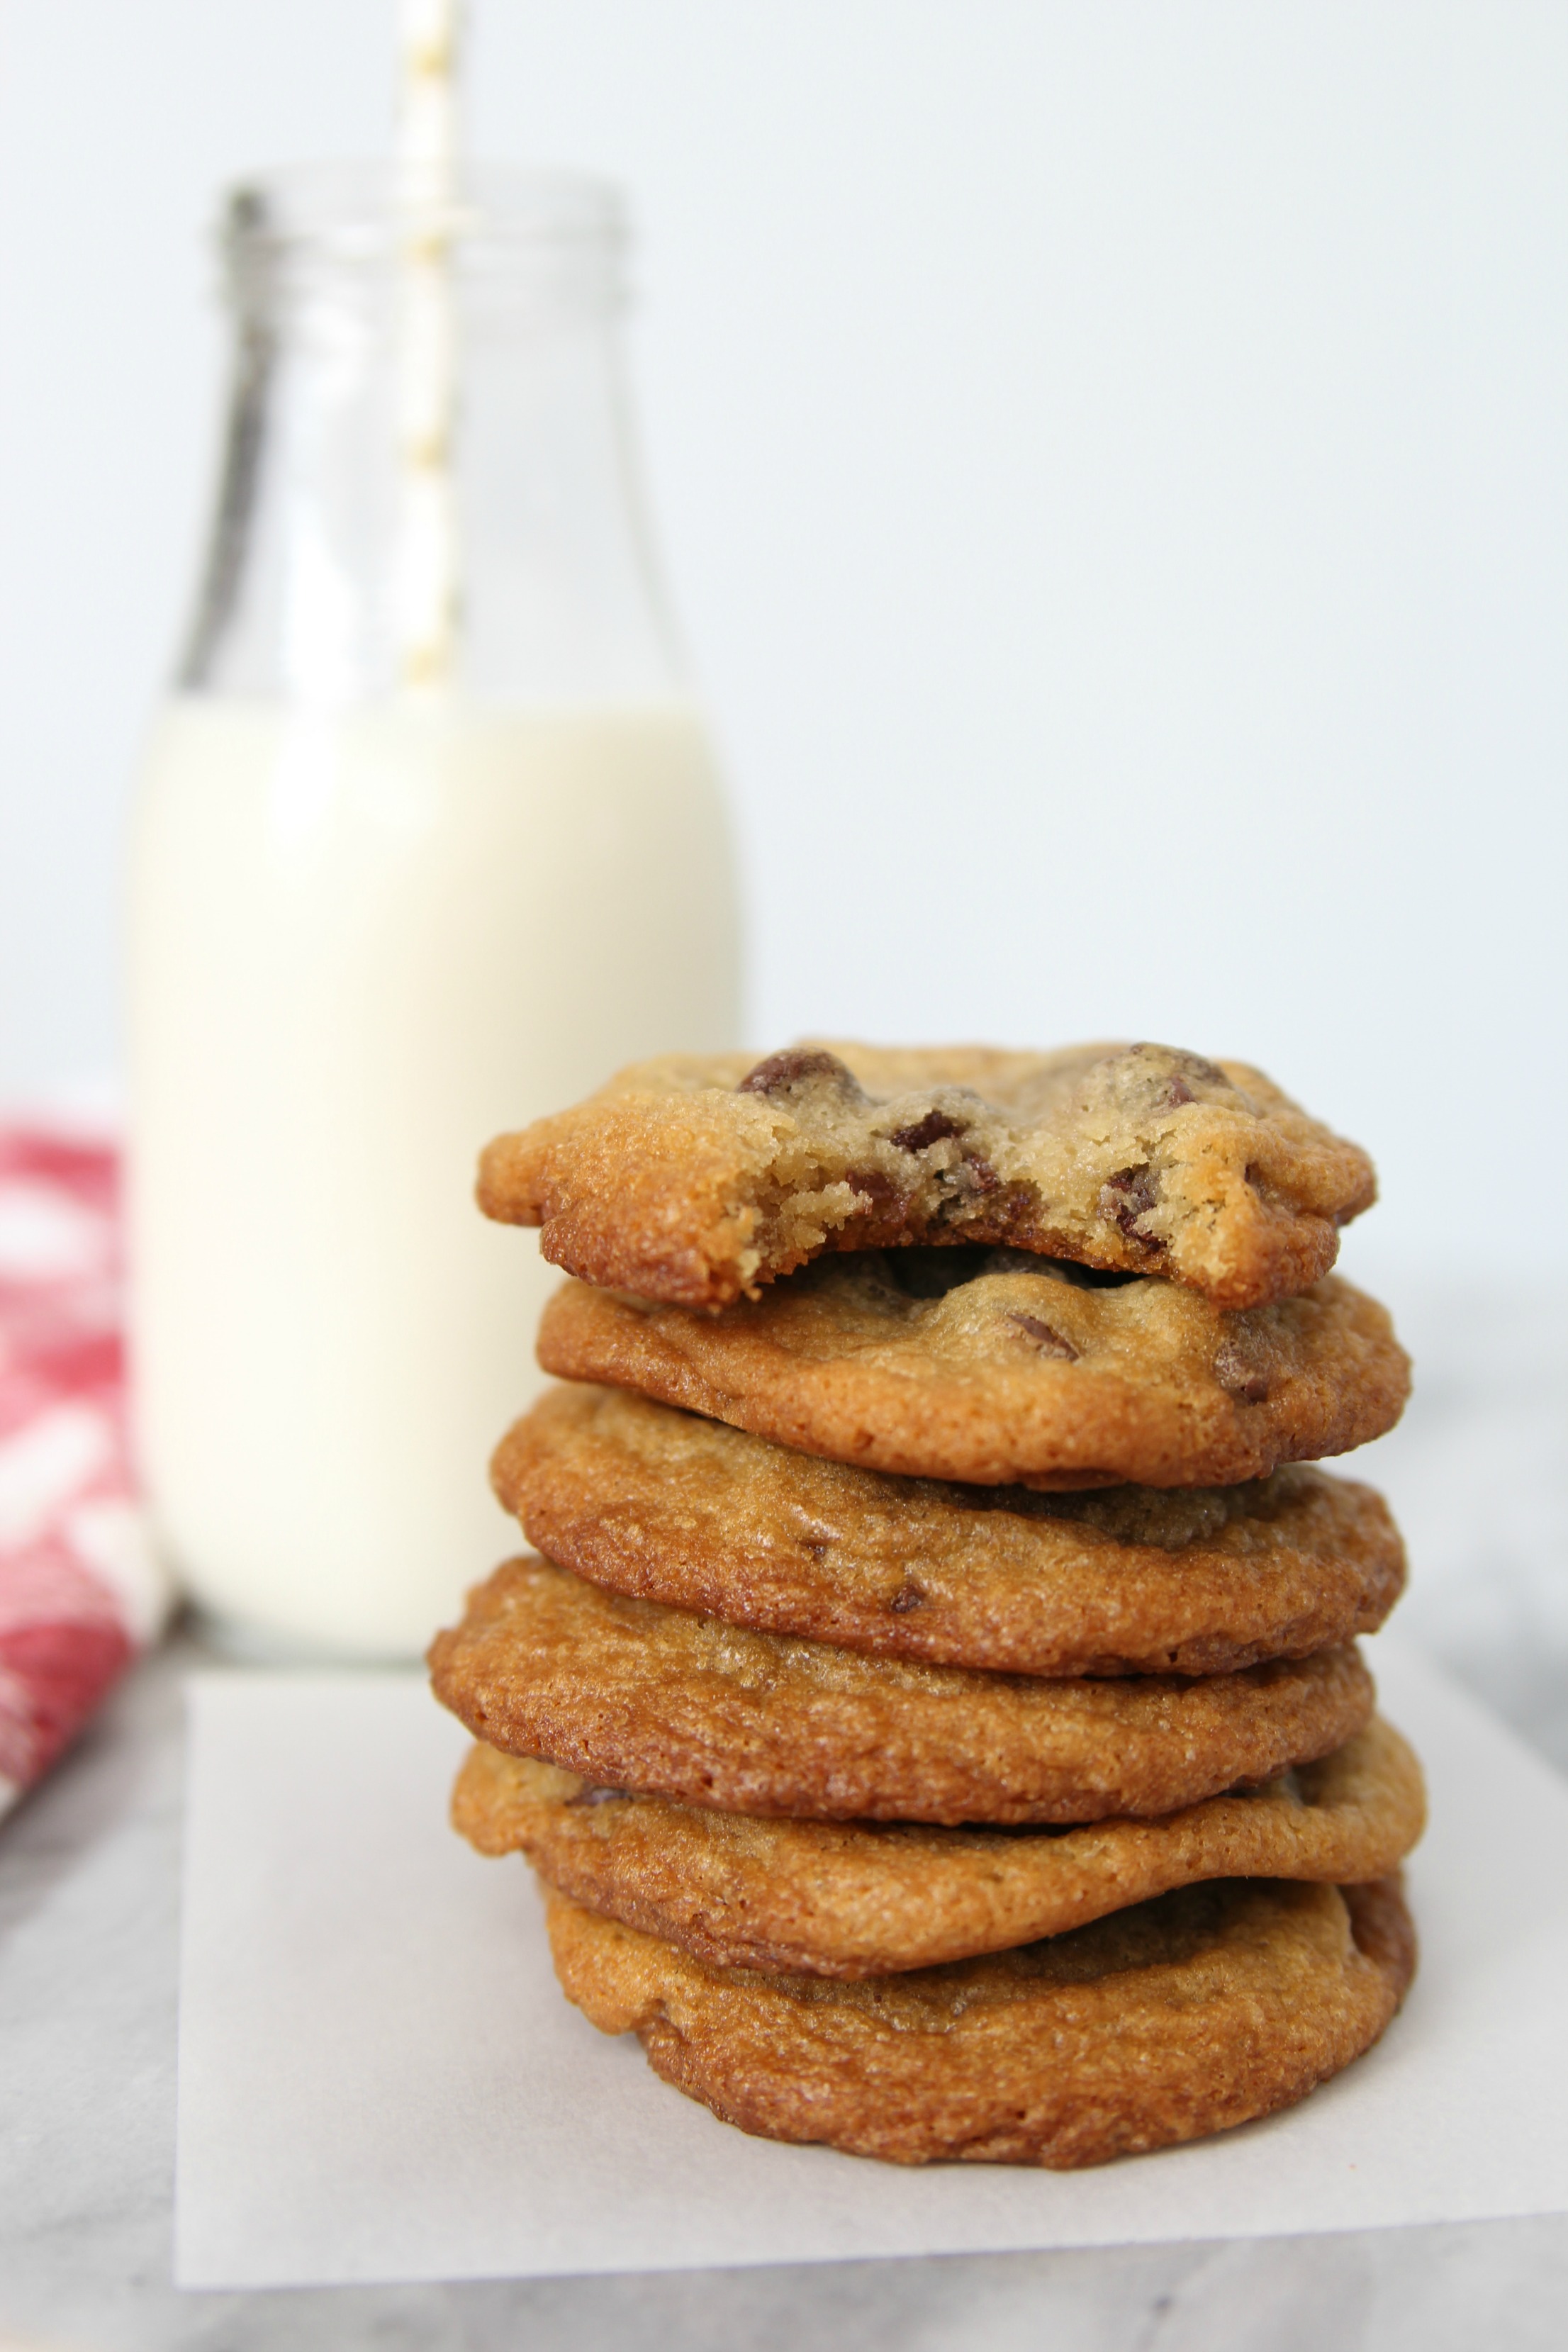 http://www.momswithoutanswers.com/secret-perfect-chocolate-chip-cookie/